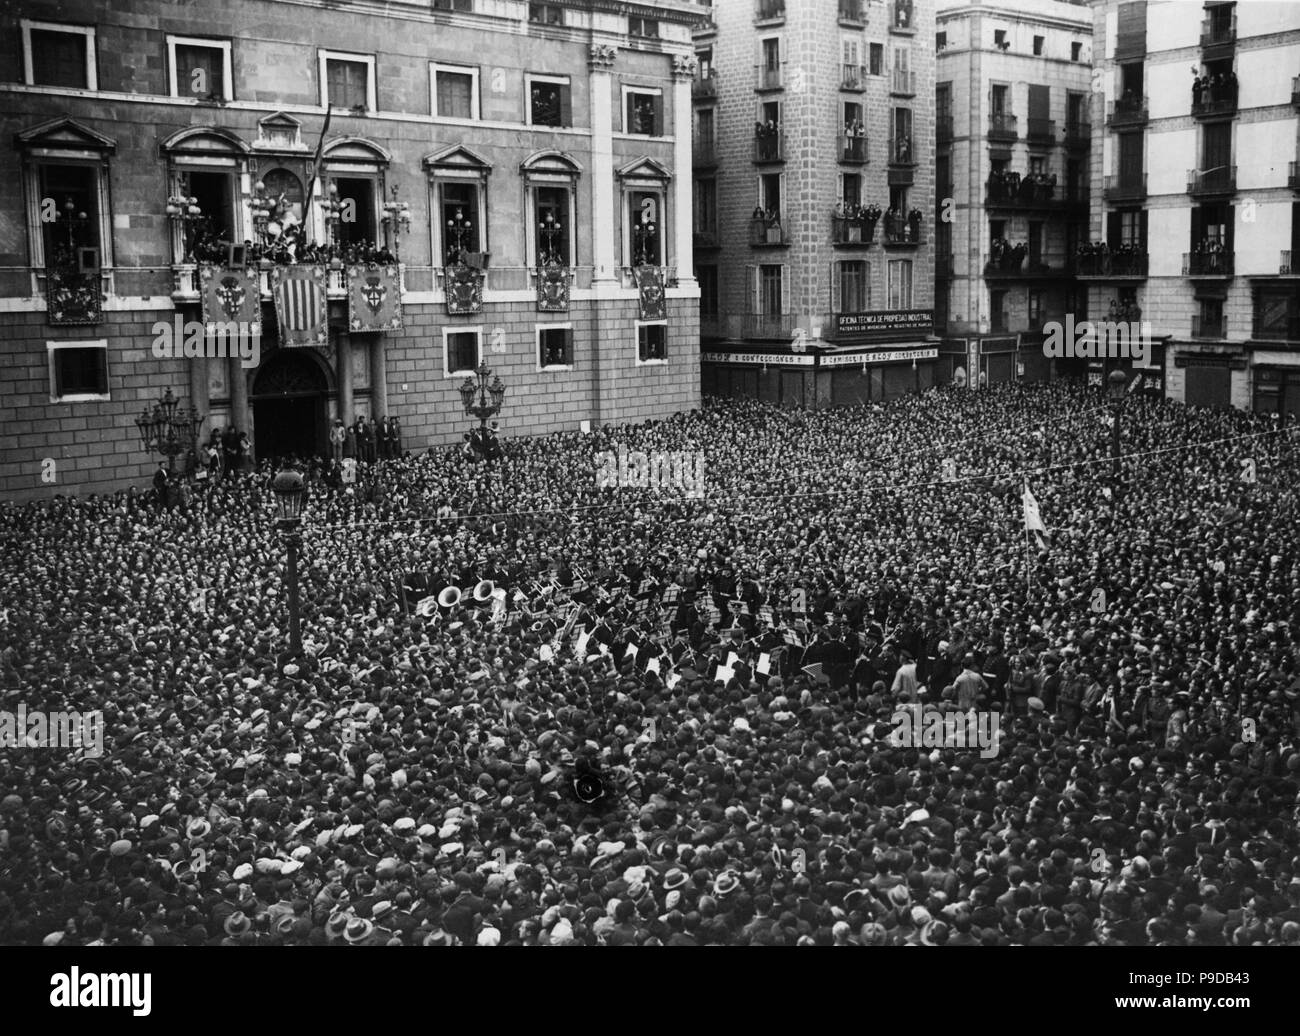 The Proclamation of the Second Spanish Republic in Barcelona on 14 April 1931. Museum: BARCELONA CITY COUNCIL. Stock Photo